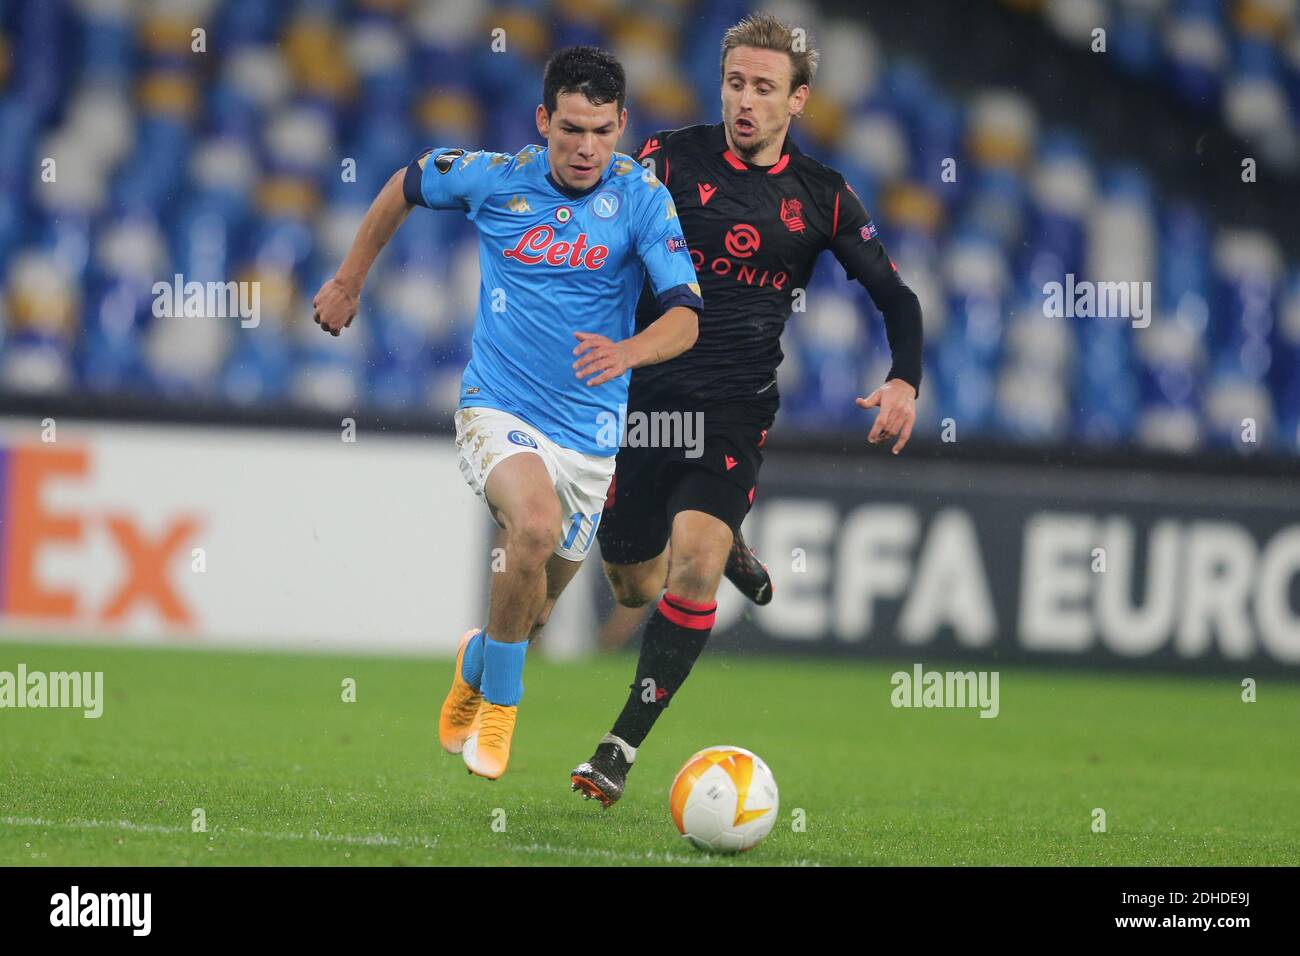 Naples, Italy. 10th Dec, 2020. SSC Napoli's Mexican striker Hirving Lozano (L) challenges for the ball with Real sociedad's Belgian striker Adnan Januzaj during the UEFA Europa League football match SSC Napoli vs Real Sociedad.Napoli and Real sociedad drew 1-1. Credit: Independent Photo Agency/Alamy Live News Stock Photo